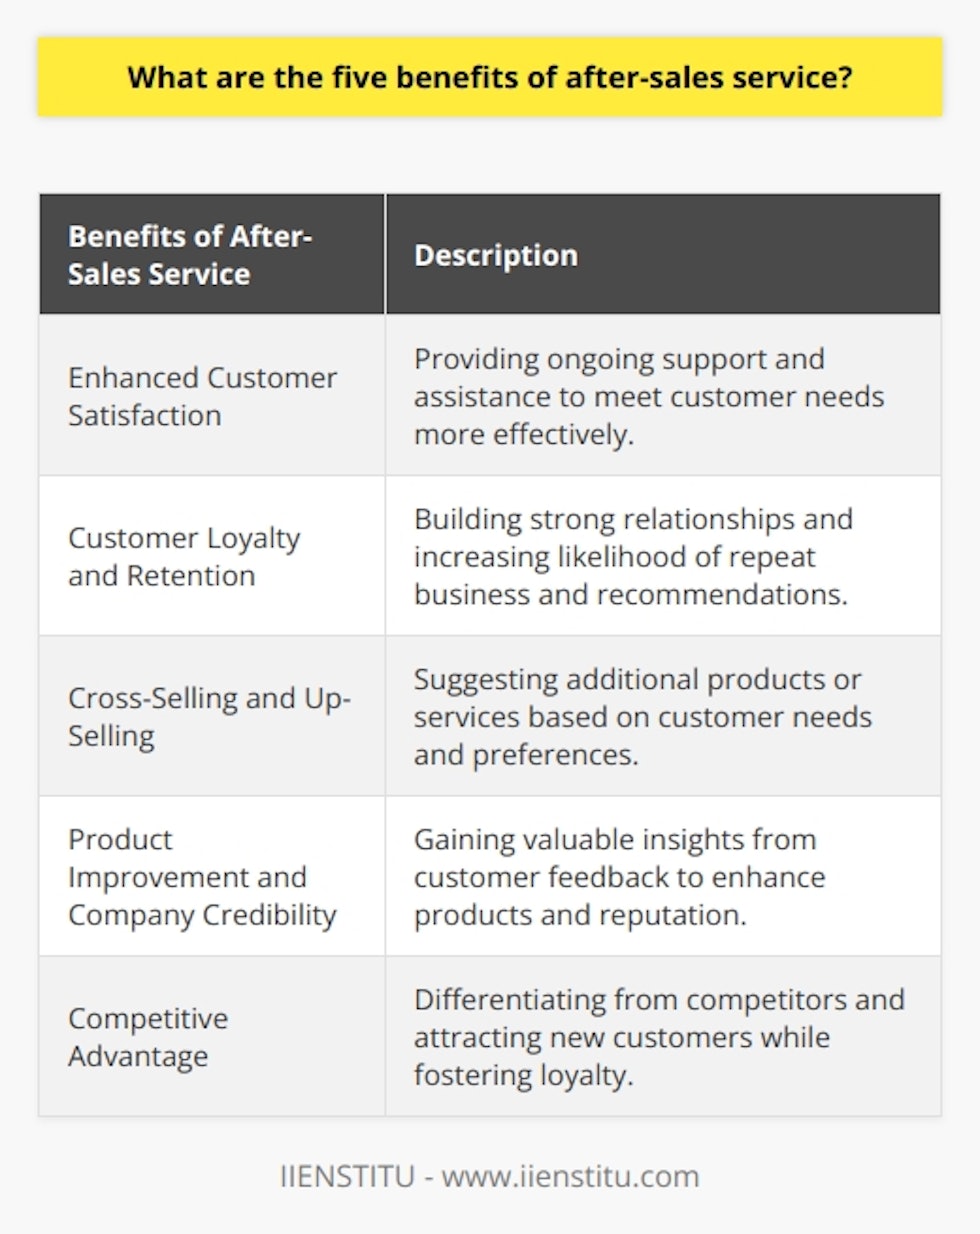 After-sales service refers to the assistance and support provided by a business to customers after they have made a purchase. While it is often overlooked, after-sales service has several benefits that can positively impact a business. In this article, we will explore five key benefits of after-sales service.The first benefit of after-sales service is enhanced customer satisfaction. By offering ongoing support and assistance, businesses can ensure positive customer experiences. Whether it is answering questions, addressing concerns, or providing technical support, after-sales service allows businesses to meet their customers' needs more effectively. This, in turn, leads to higher levels of customer satisfaction and increases the likelihood of repeat business.Another benefit is customer loyalty and retention. When customers receive attentive support and assistance from a business, they are more likely to continue patronizing that business and recommend it to others. By consistently providing a high level of after-sales service, businesses can build strong relationships with their customers, increasing customer loyalty and retention rates.Furthermore, effective after-sales service provides opportunities for cross-selling and up-selling. By maintaining active communication with customers, businesses can stay informed of their customers' needs and preferences. This information can be used to suggest additional products or services that complement the original purchase. This not only increases revenue for the business but also provides added value to the customers.The after-sales service also plays a crucial role in product improvement and company credibility. The feedback obtained through after-sales service activities can provide valuable insights into product performance and customer satisfaction. This information can be used to make necessary improvements to the product, addressing any issues or shortcomings. By continuously improving their offerings based on customer feedback, businesses can enhance their credibility and reputation in the marketplace.Lastly, exceptional after-sales service can give companies a competitive advantage. In today's competitive business landscape, it is essential for businesses to differentiate themselves from their competitors. By investing in superior after-sales service experiences, businesses can stand out from the crowd and gain a competitive edge. This not only helps in attracting new customers but also fosters customer loyalty and retention.In conclusion, after-sales service offers several benefits that can positively impact a business. From enhancing customer satisfaction and loyalty to providing opportunities for cross-selling and up-selling, after-sales service is a crucial aspect of any business strategy. By investing in after-sales service and consistently delivering exceptional support and assistance to customers, businesses can differentiate themselves, improve their products, and ultimately achieve success in the marketplace.